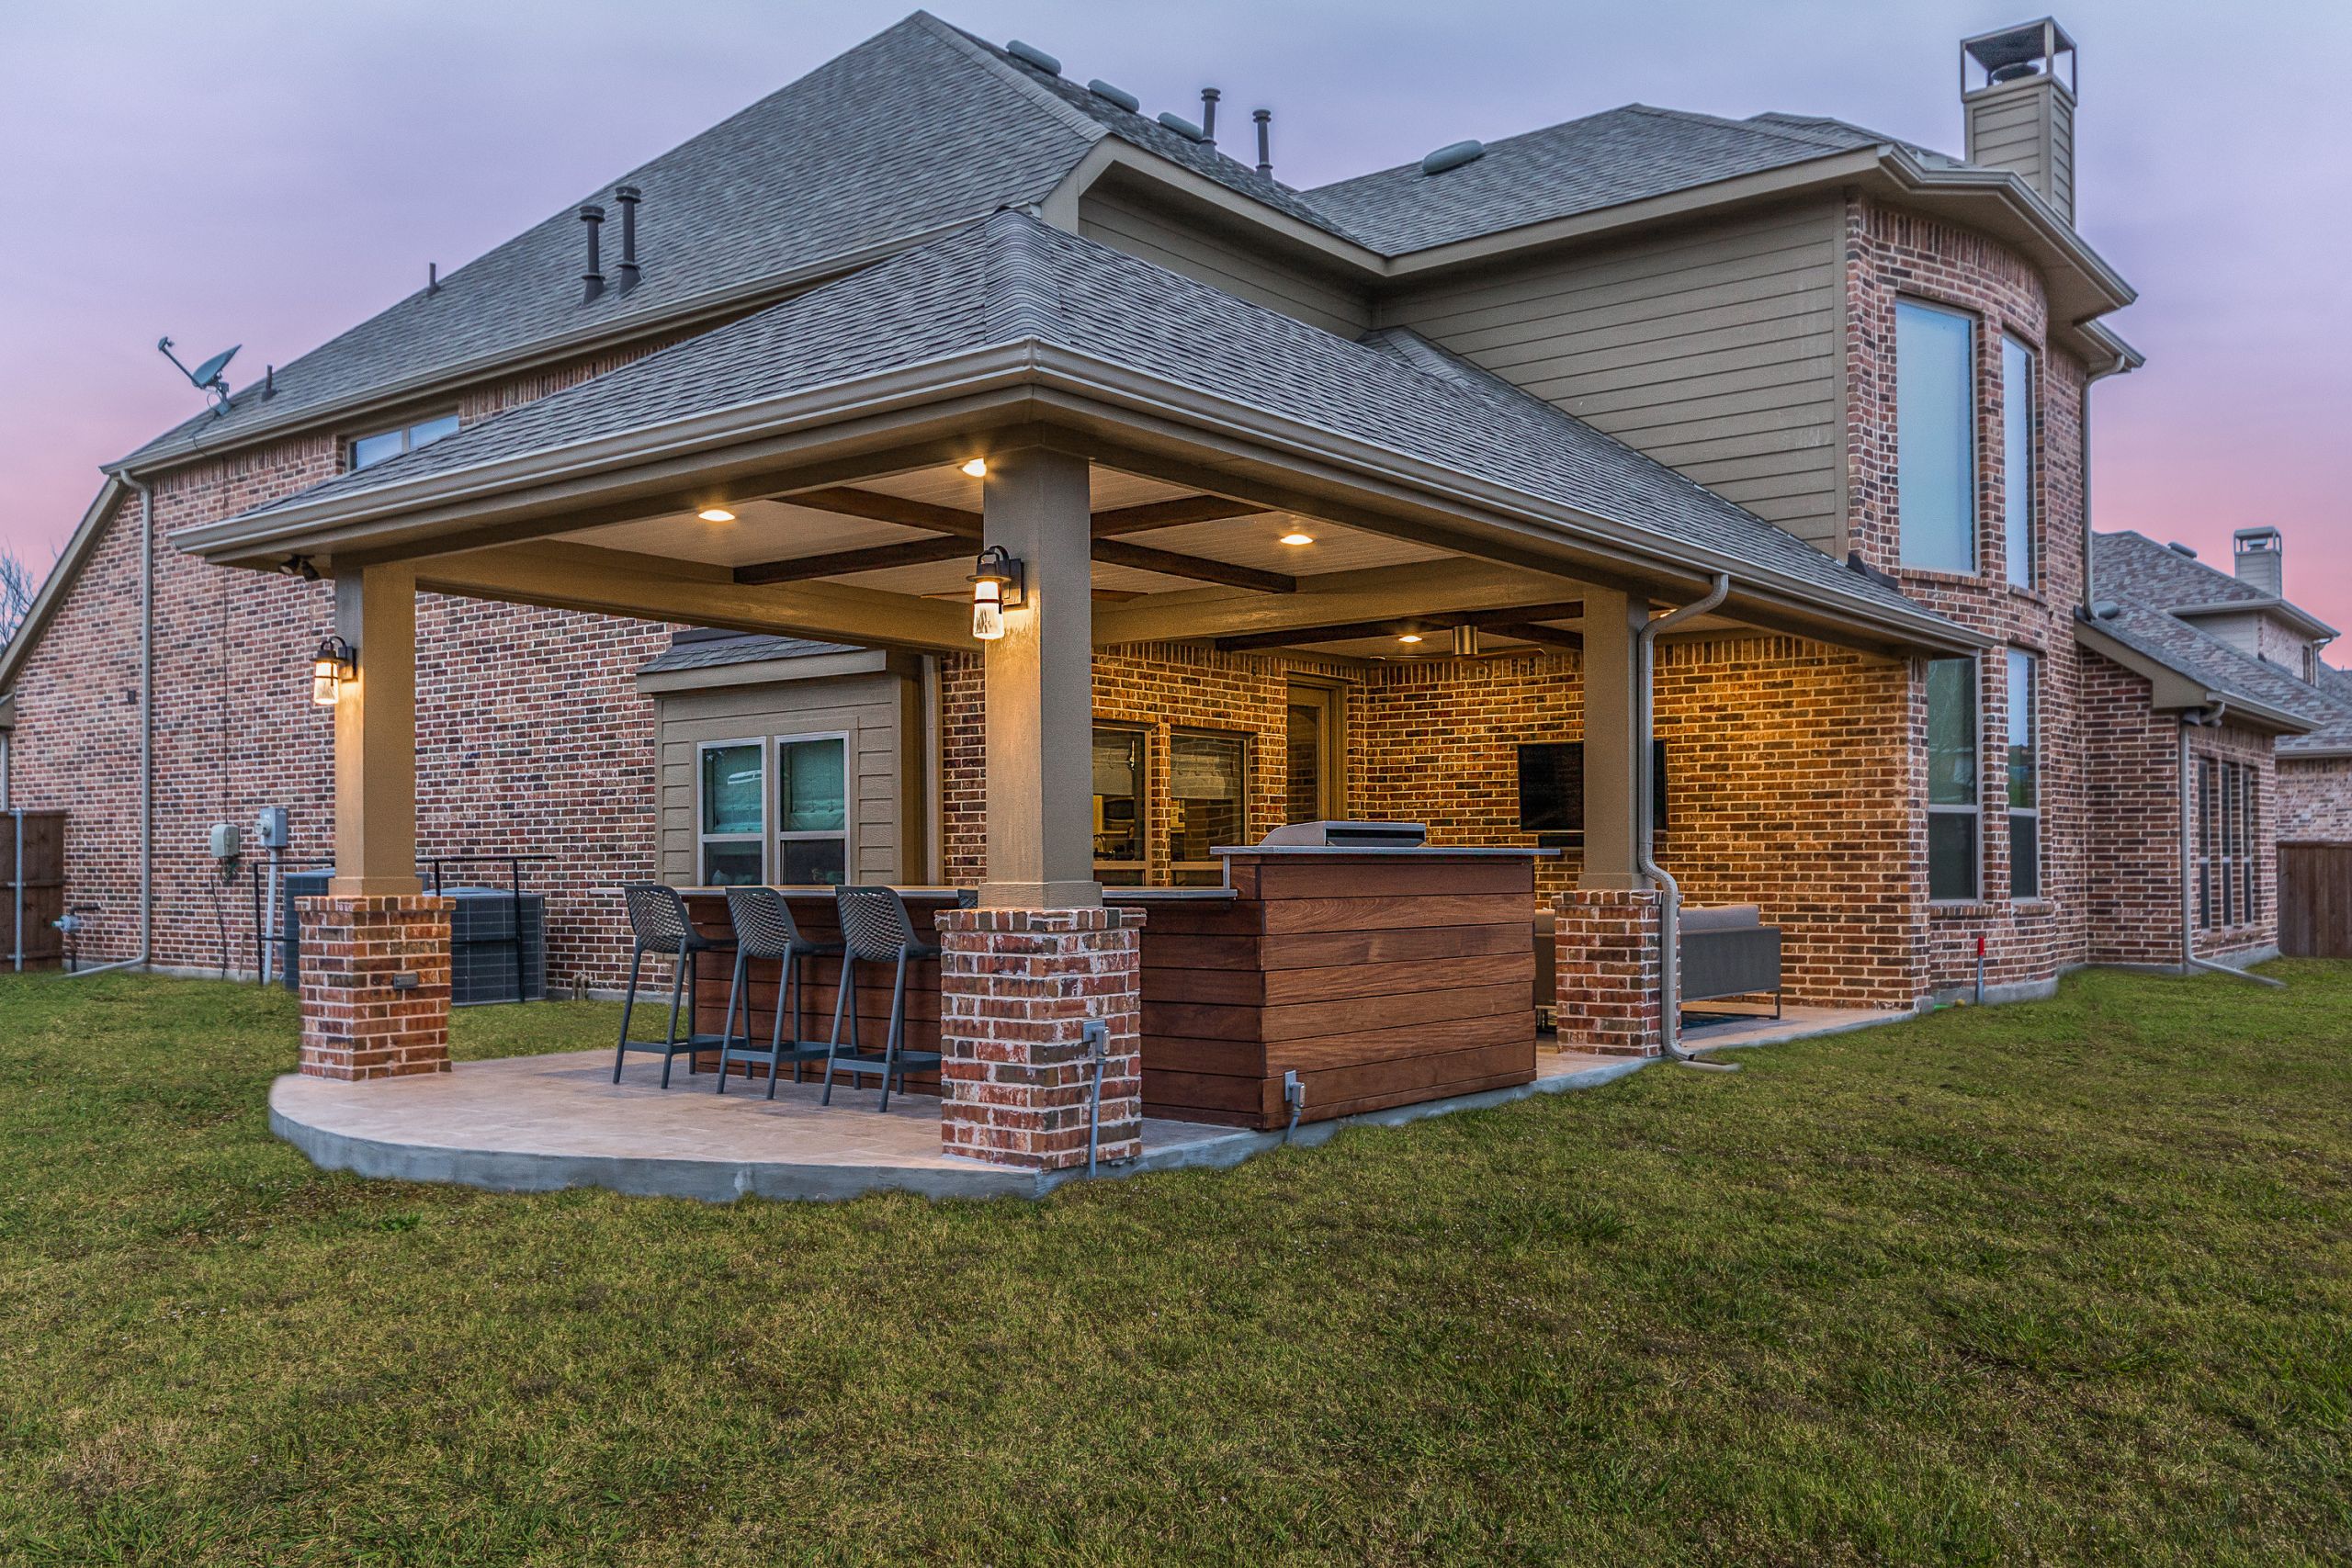 Outdoor Kitchen Covered Patio
 Patio Cover and Outdoor Kitchen in Coppell Texas Custom